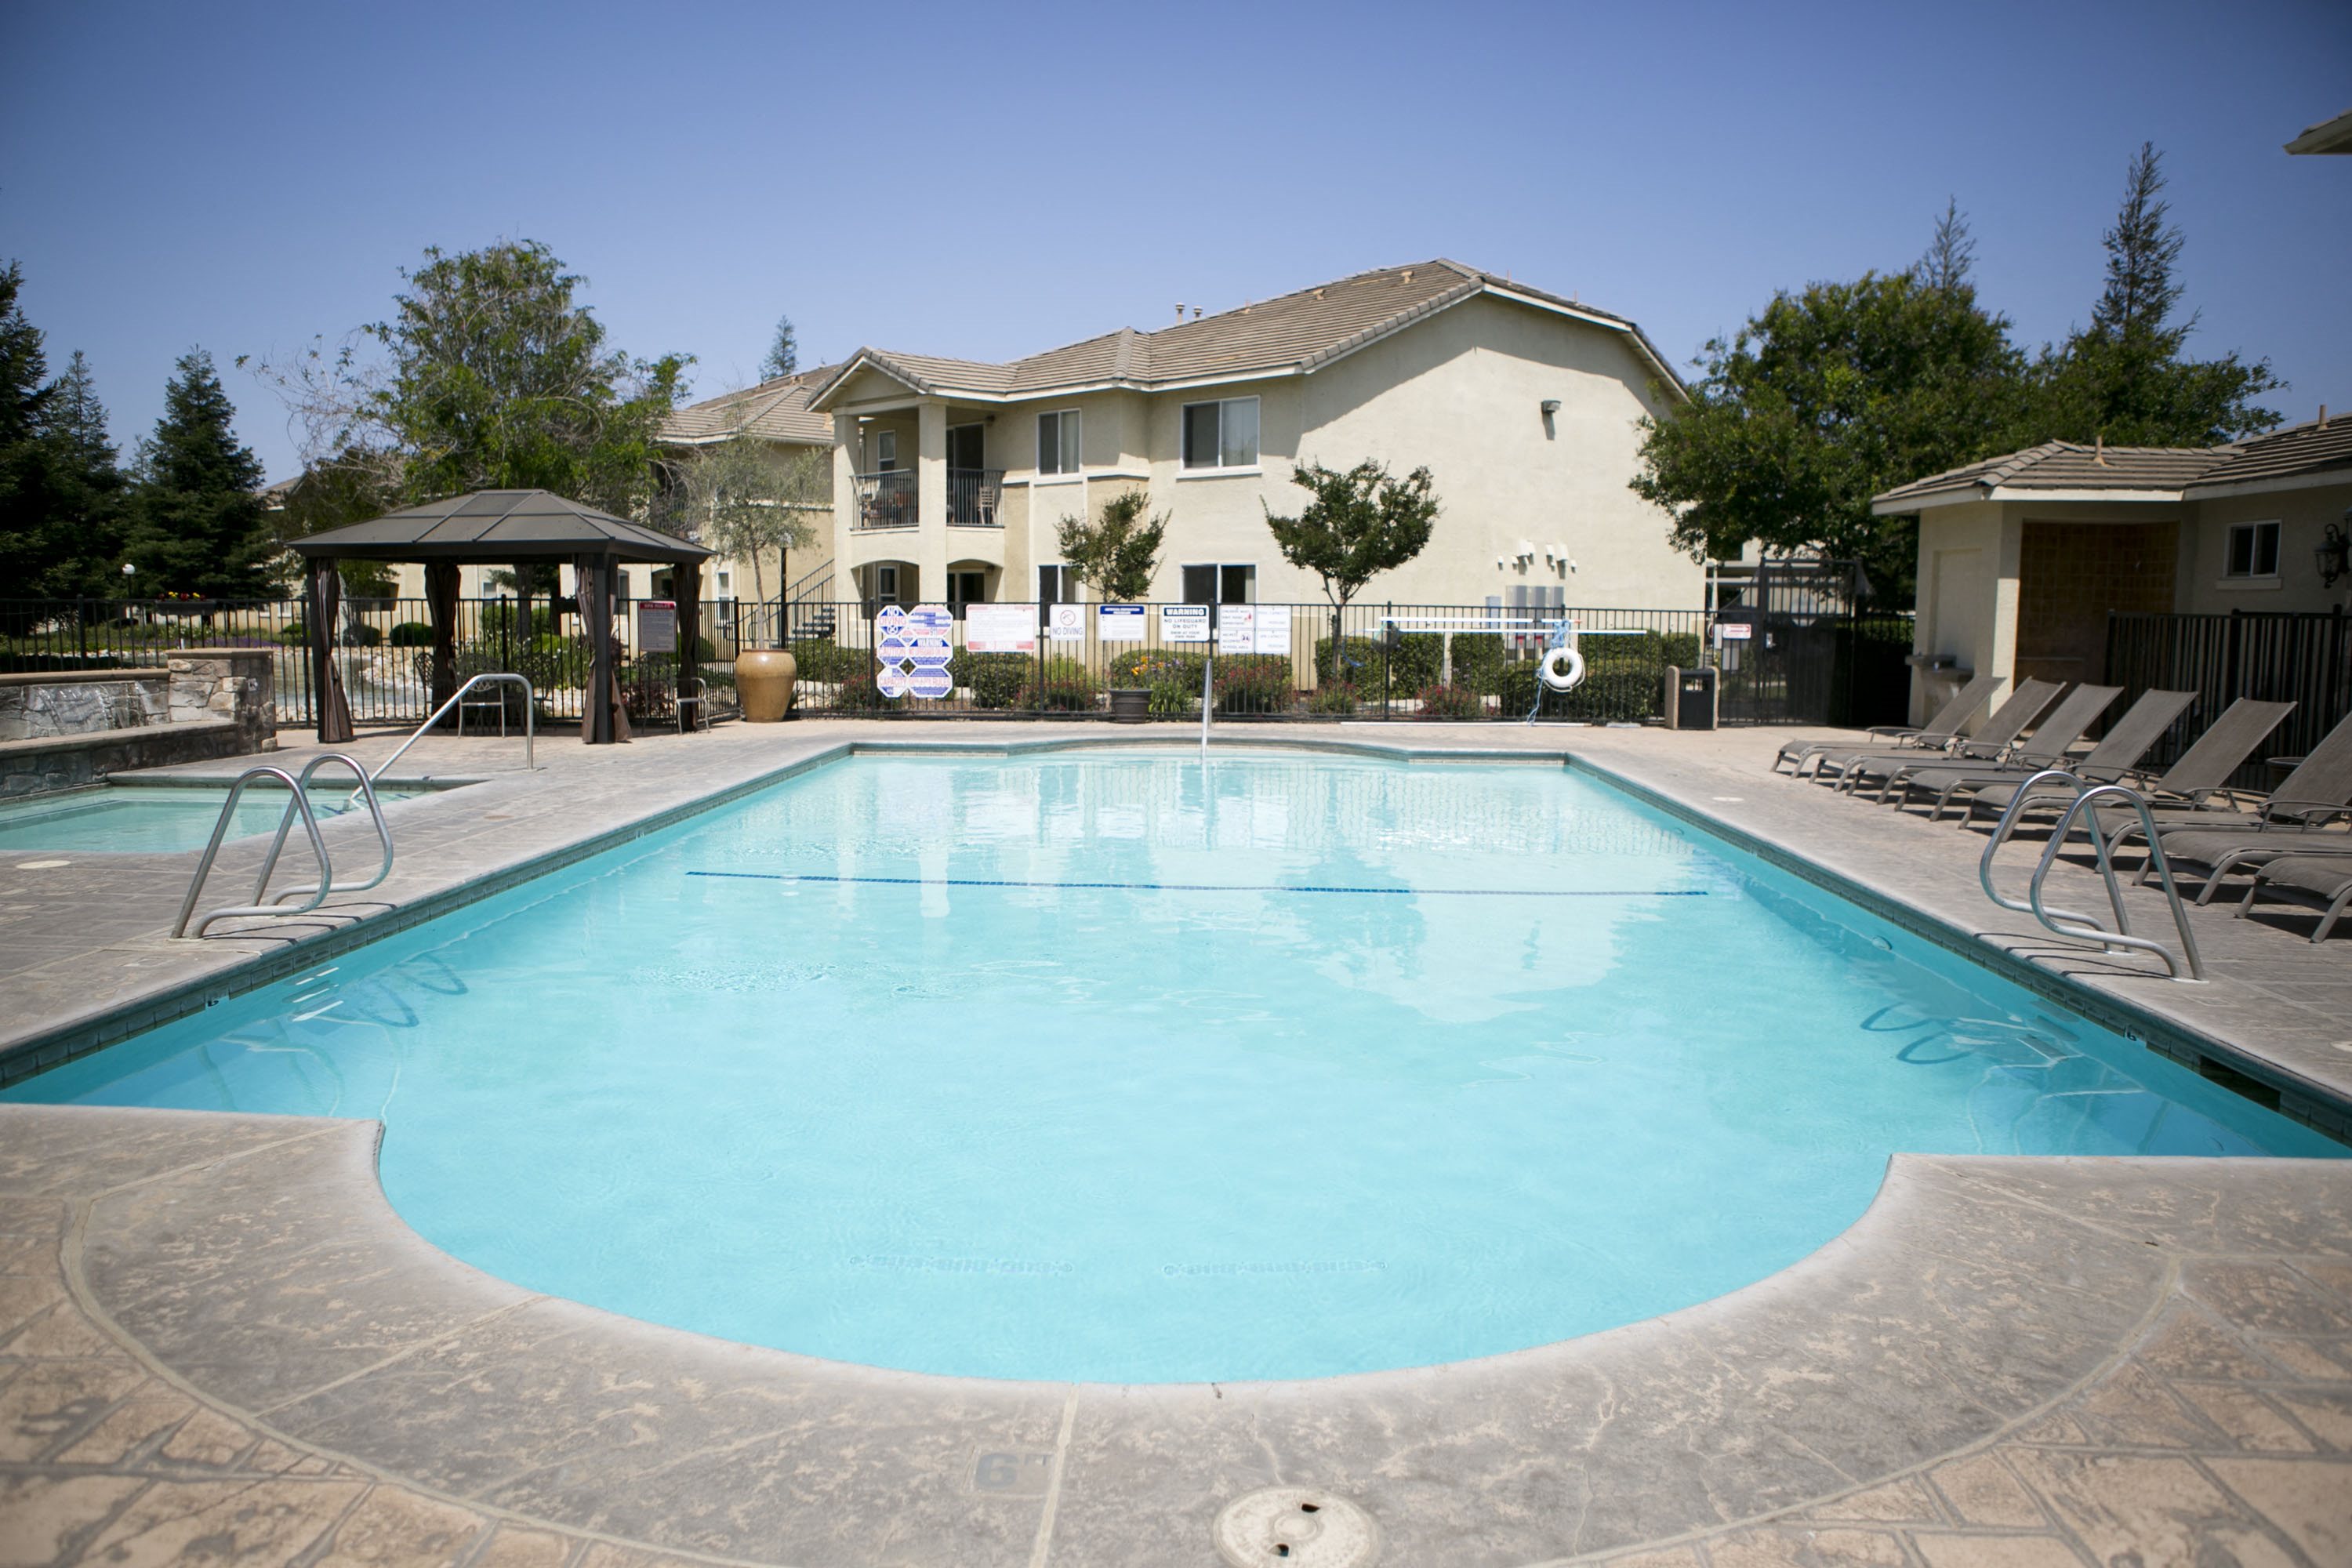 Photos and Video of Village Terrace in Merced, CA